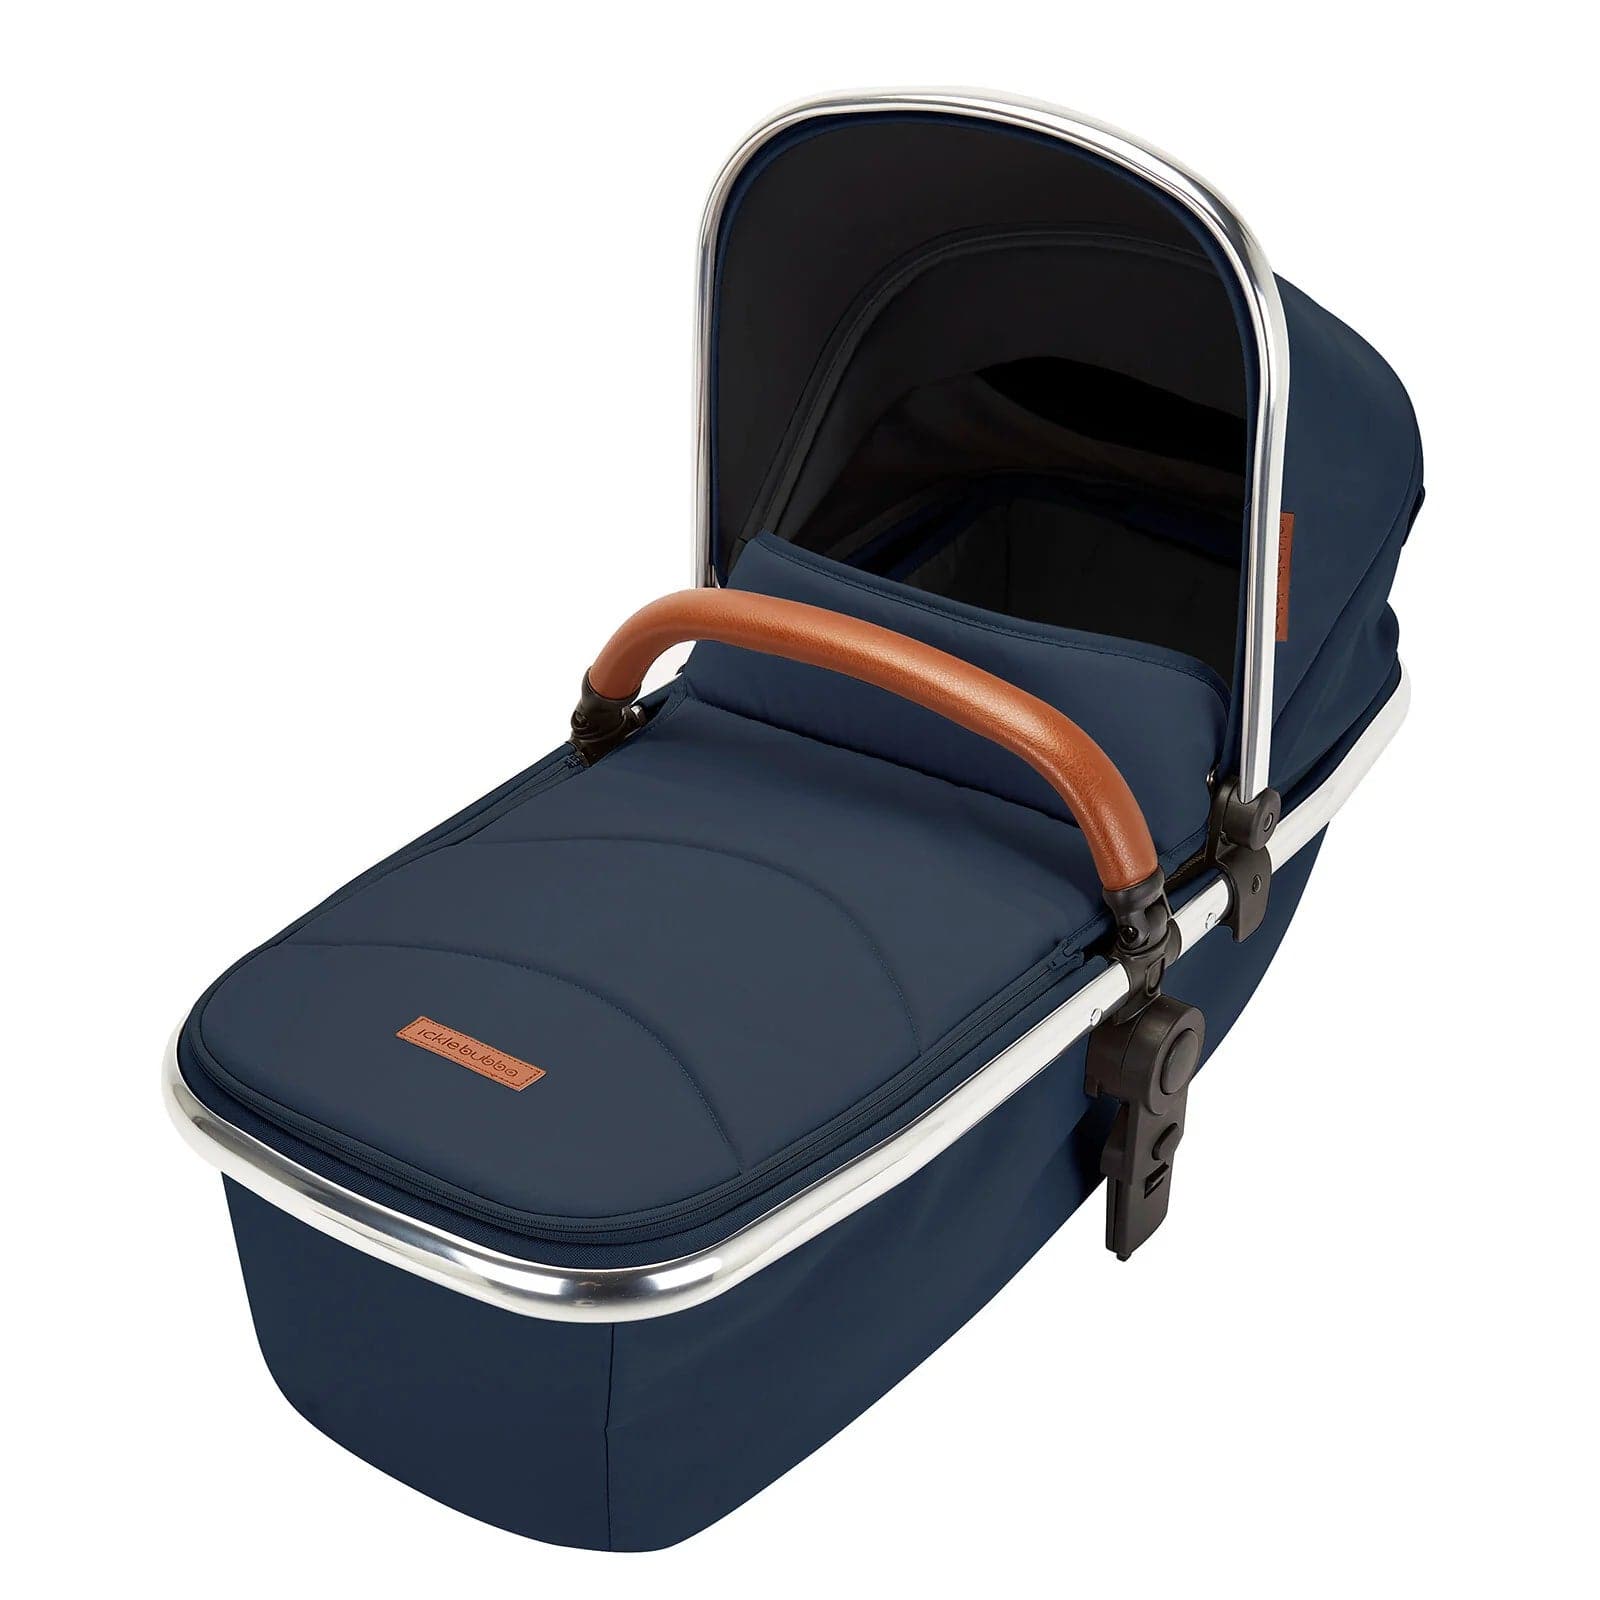 Ickle Bubba Eclipse 2 In 1 Carrycot & Pushchair - Chrome / Midnight Blue / Tan - For Your Little One